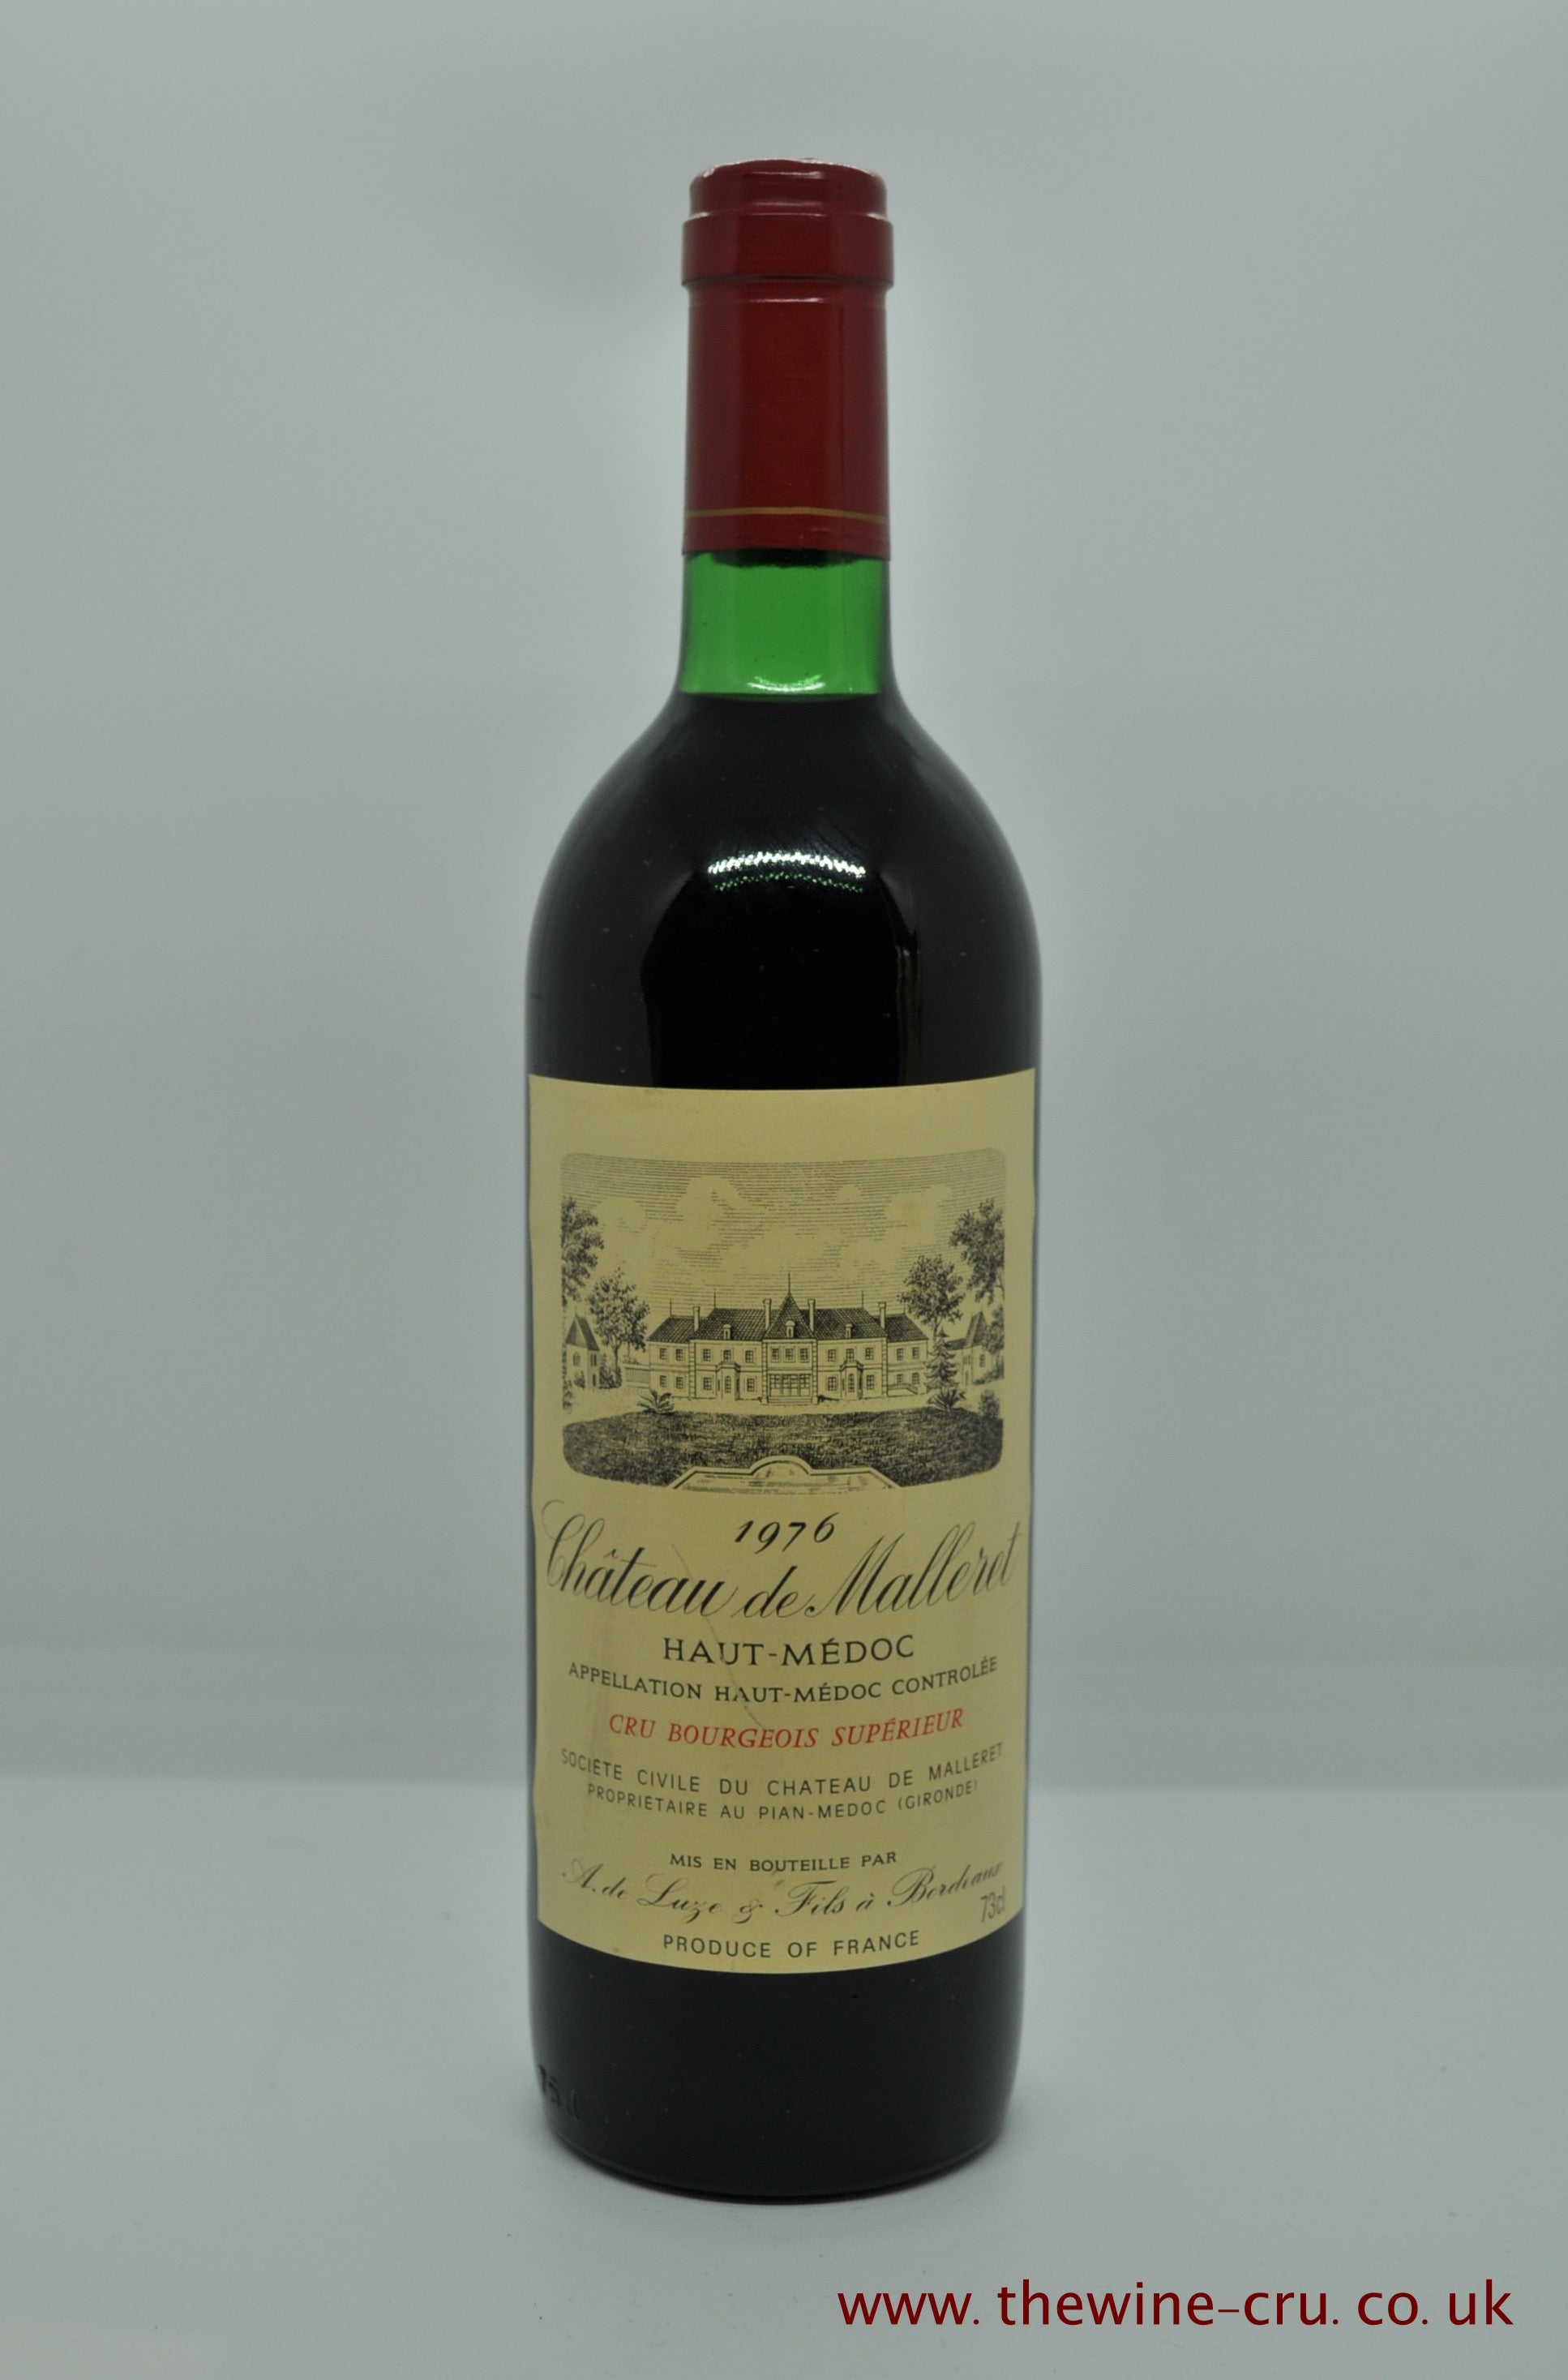 1976 vintage red wine. Chateau de Malleret 1976. France Bordeaux. Immediate delivery. Free local delivery. Gift wrapping available.